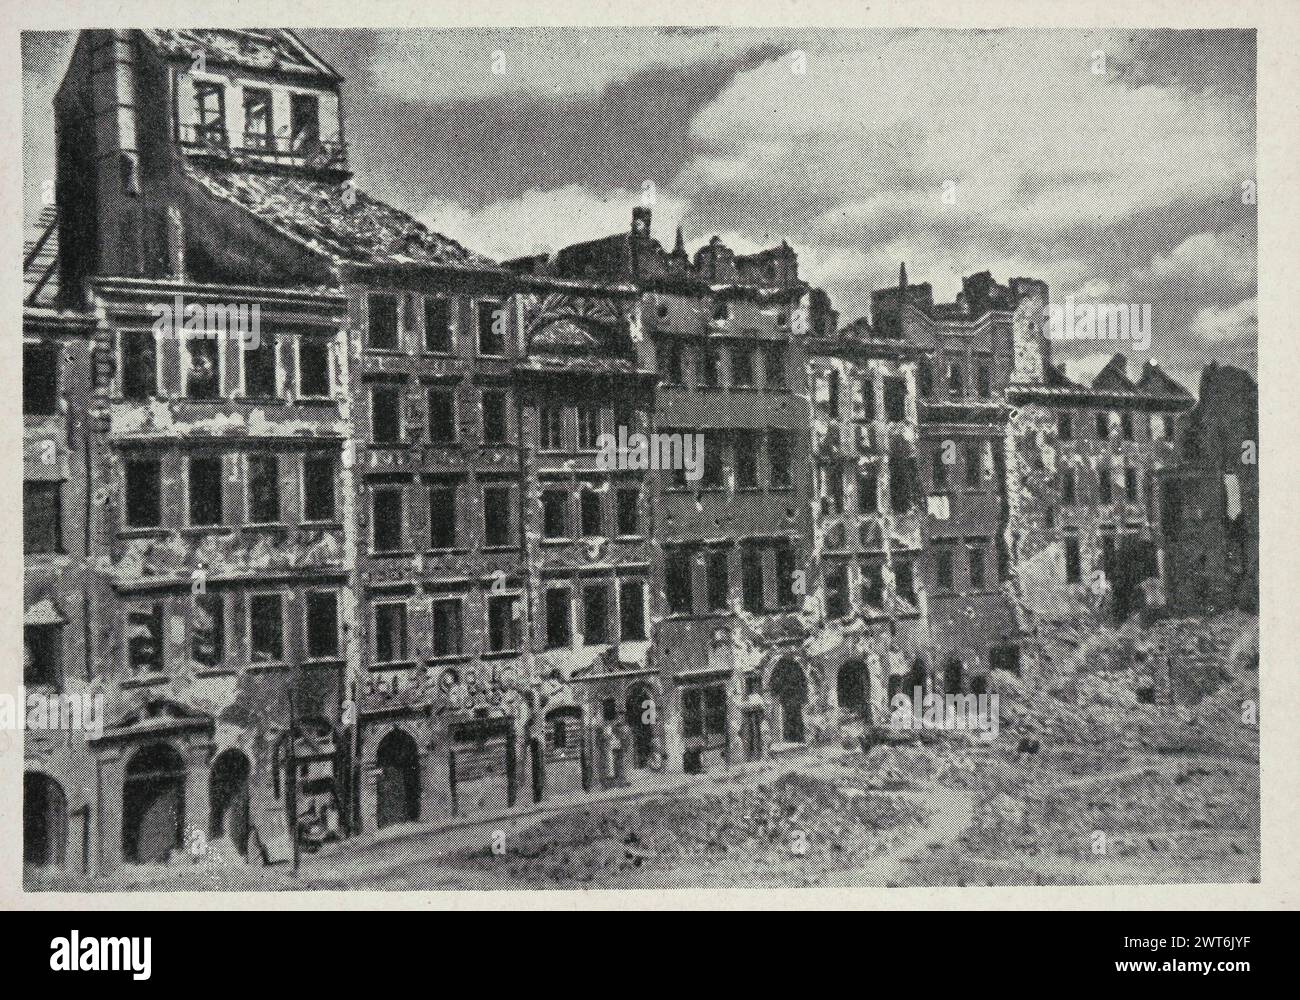 Vintage 1945 black and white postcard showing the destruction of Warsaw, Poland, during World War II, the Old Market ruins Stock Photo